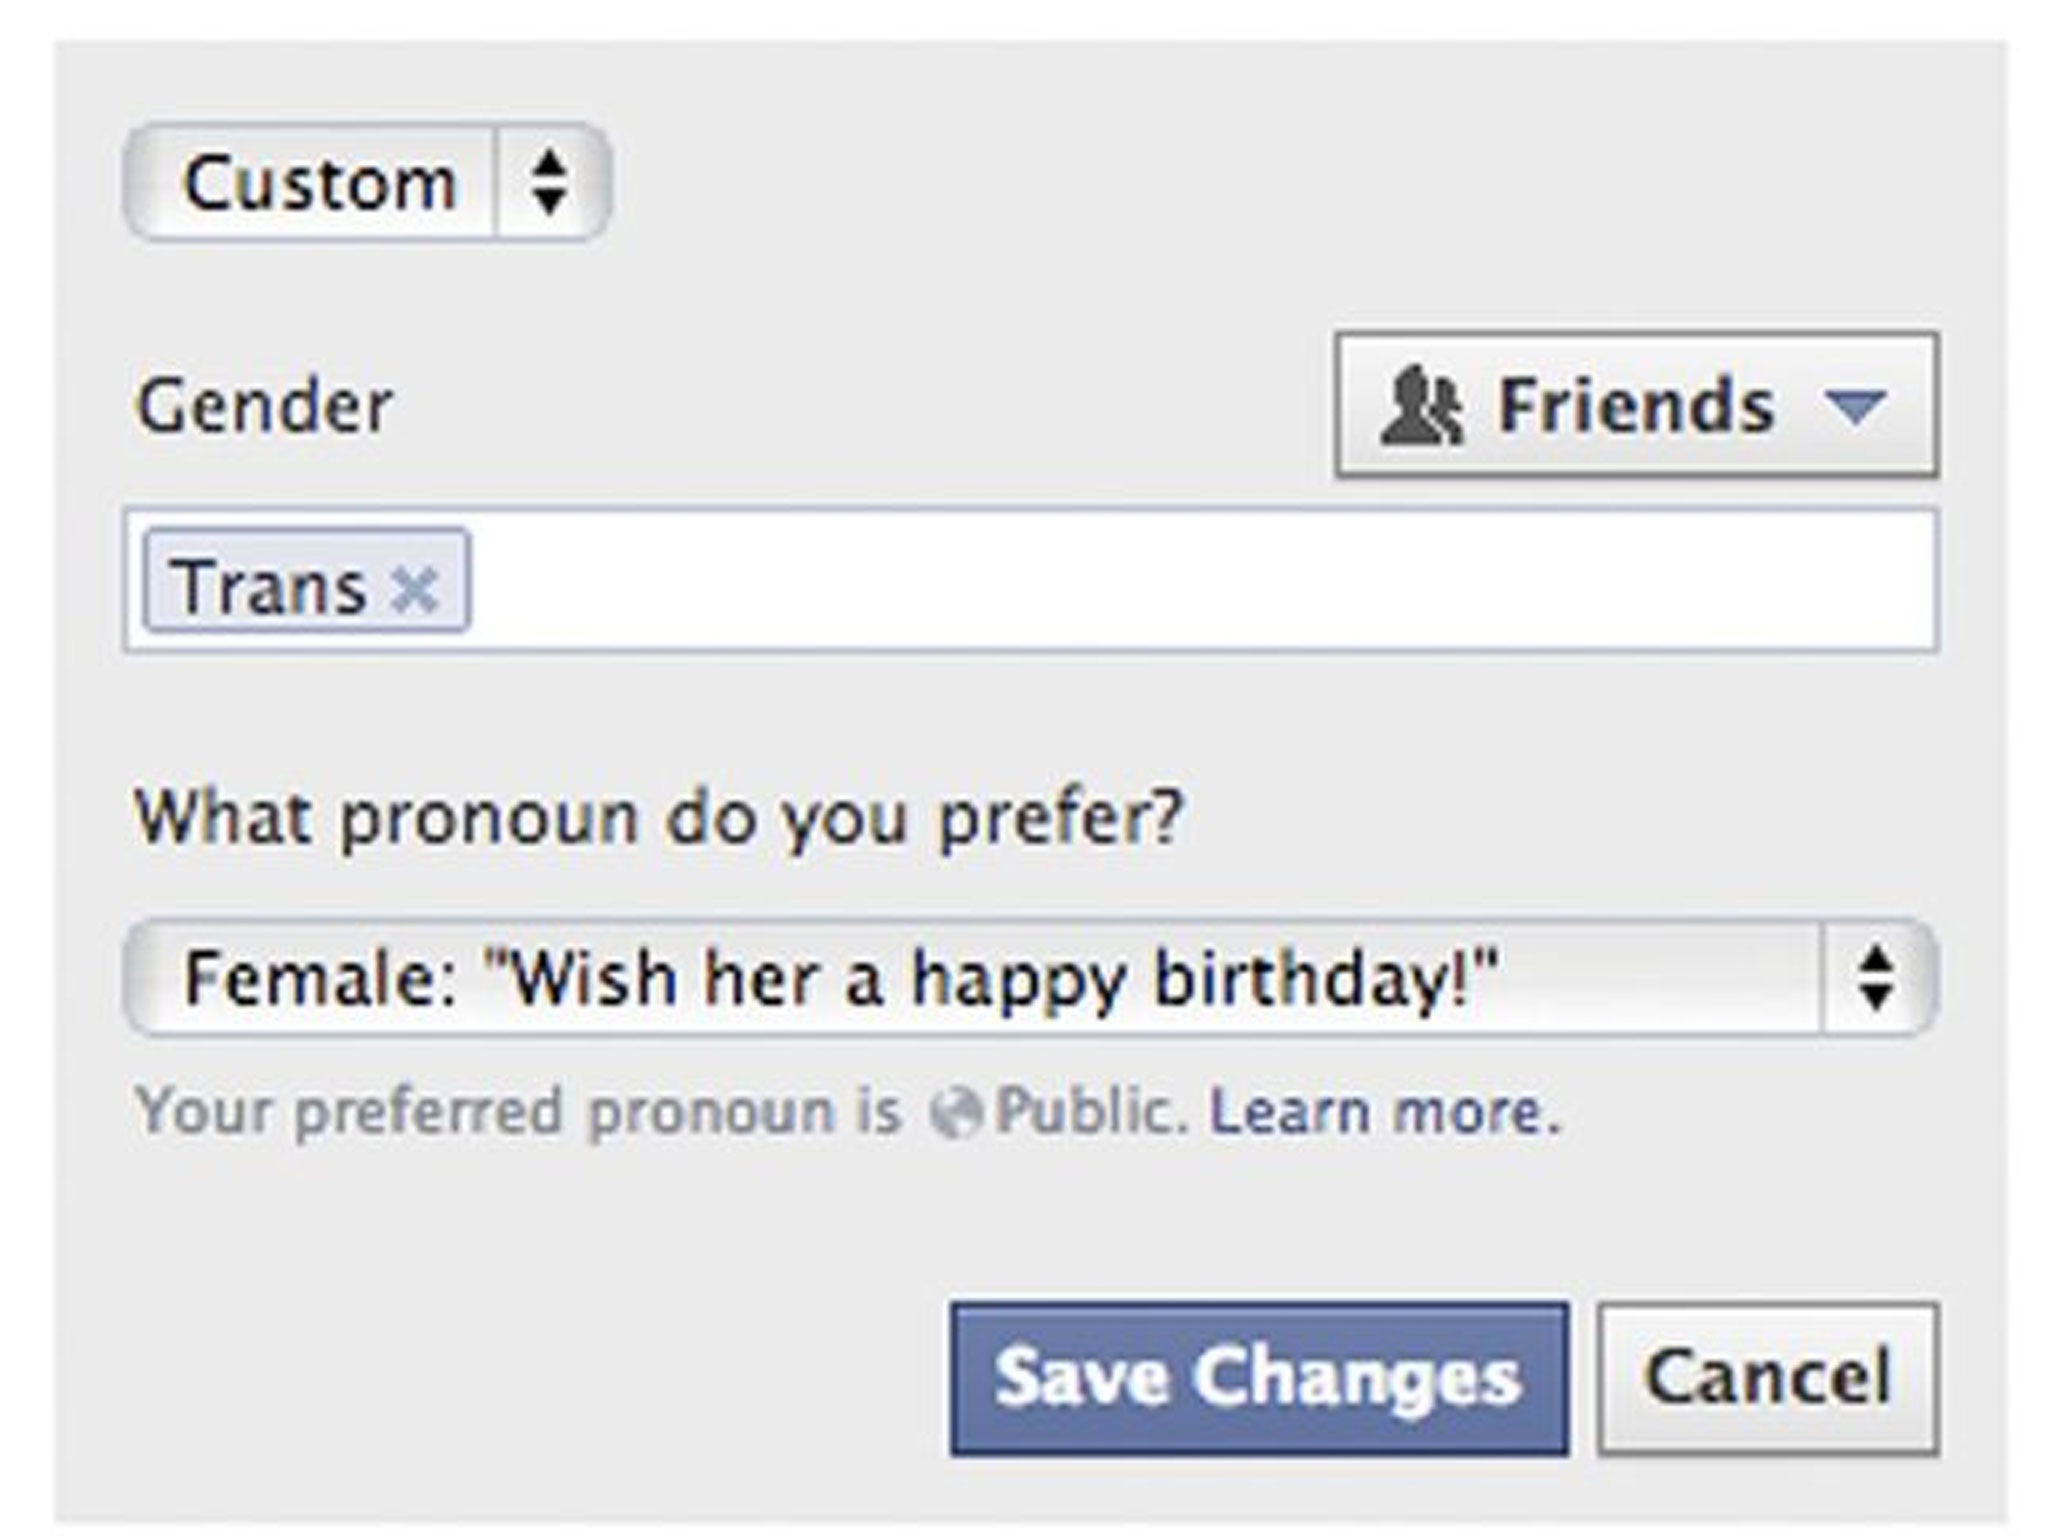 A screen shot released by Facebook shows the new gender option screen.